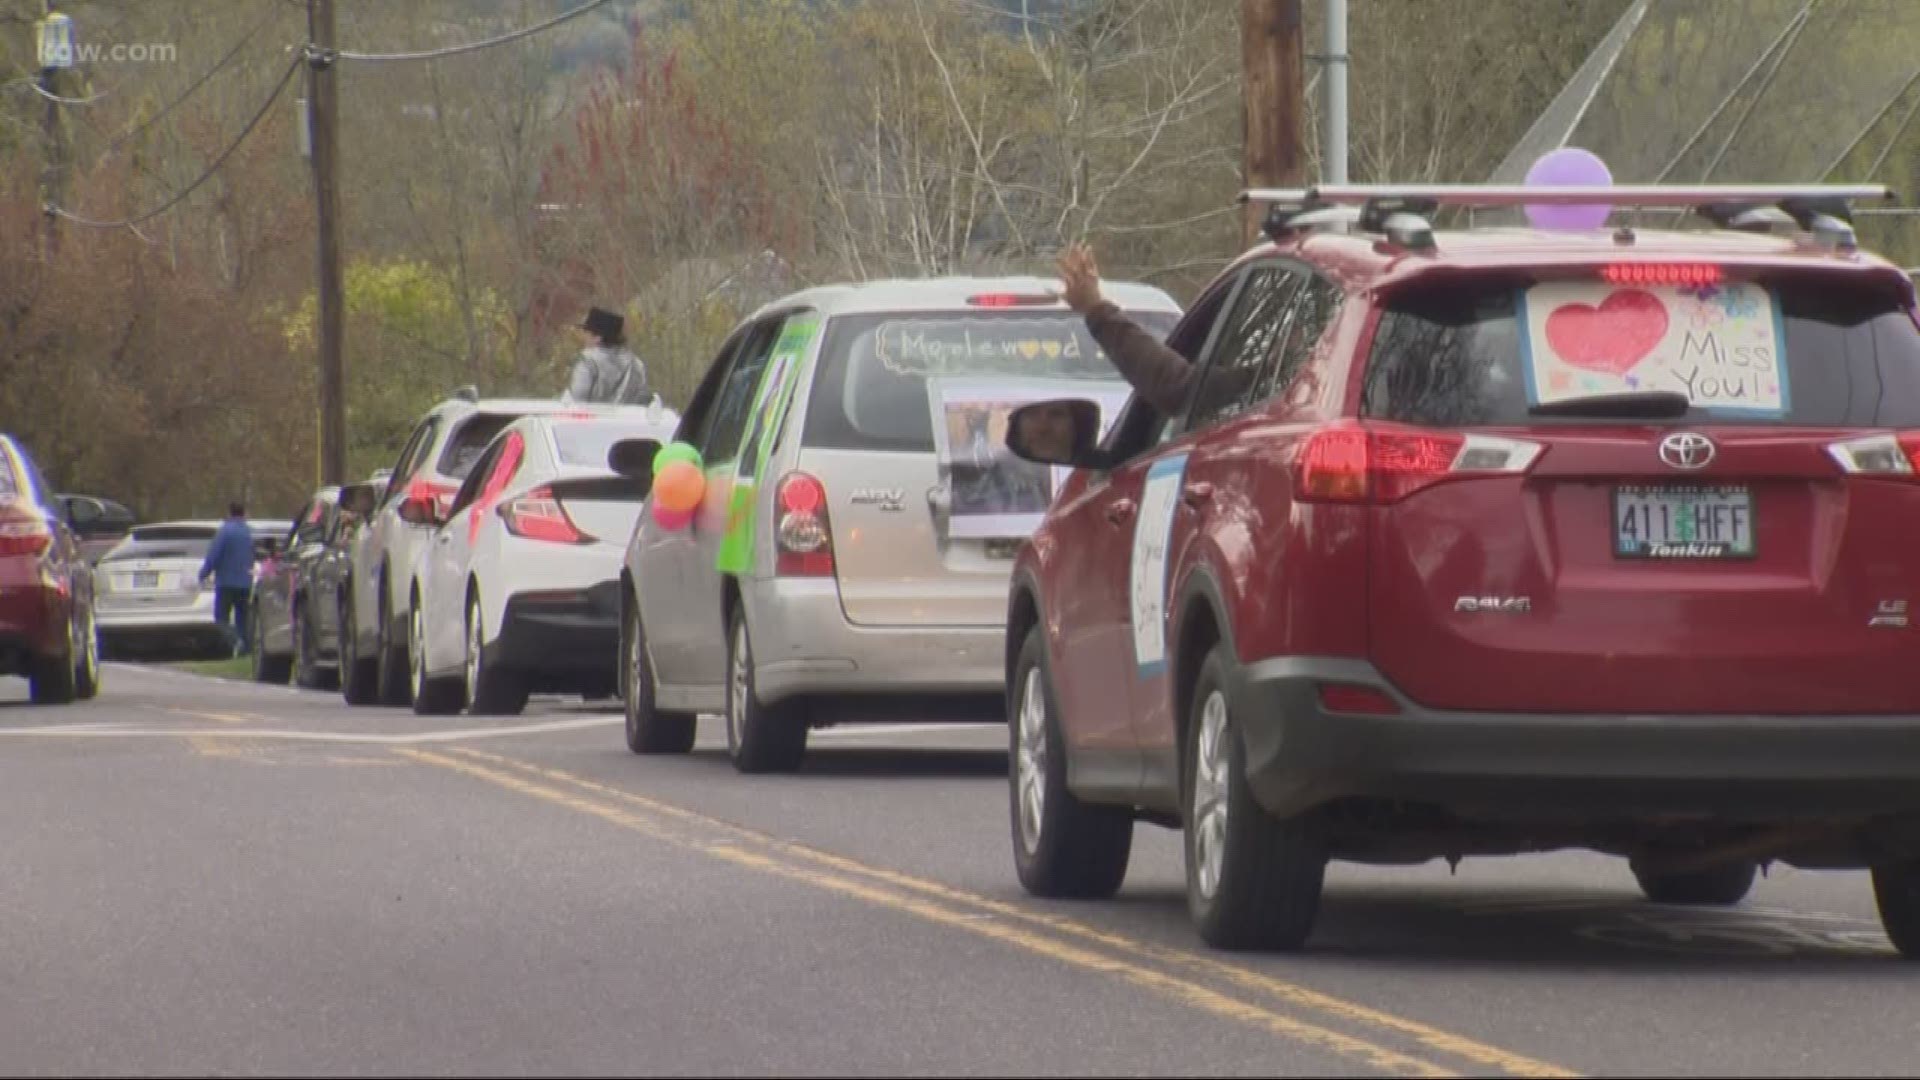 Teachers from Portland and Gresham waved hello from their cars as students lined the street at a safe social distance.